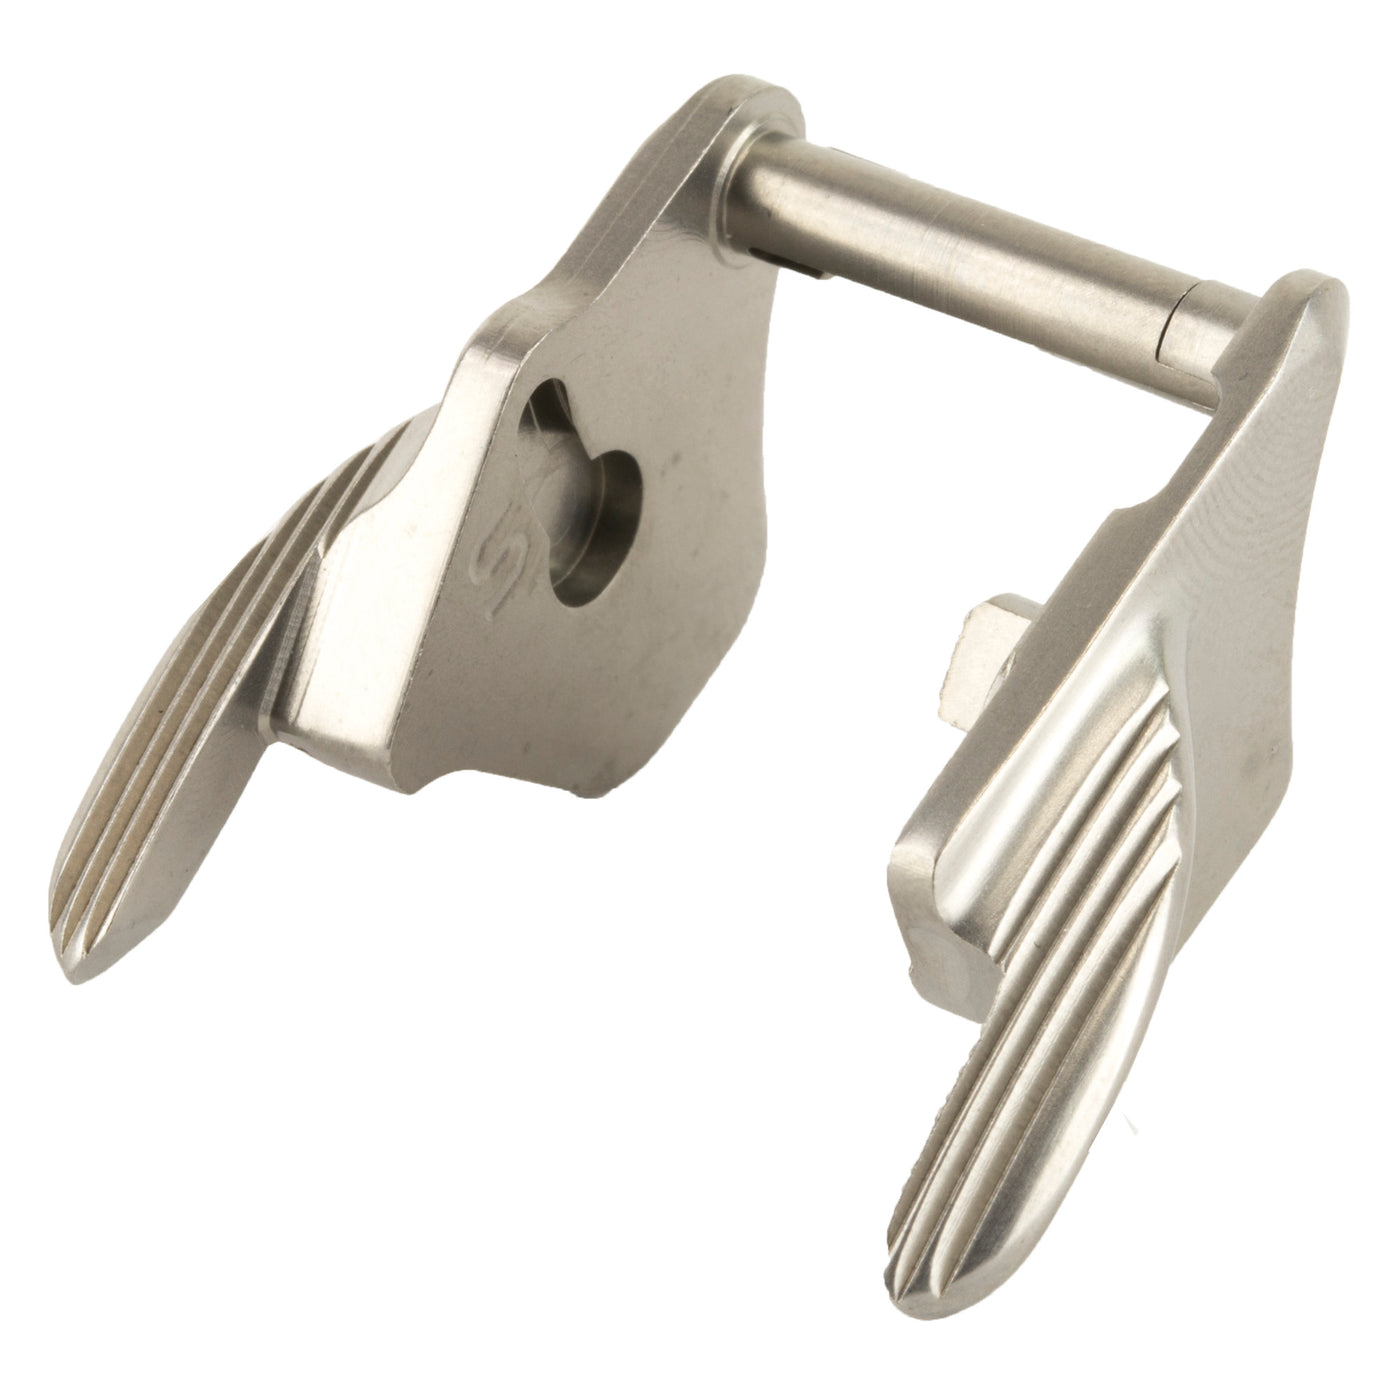 Wilson Ambidextrous Thumb - Safety Bullet Proof Stainless